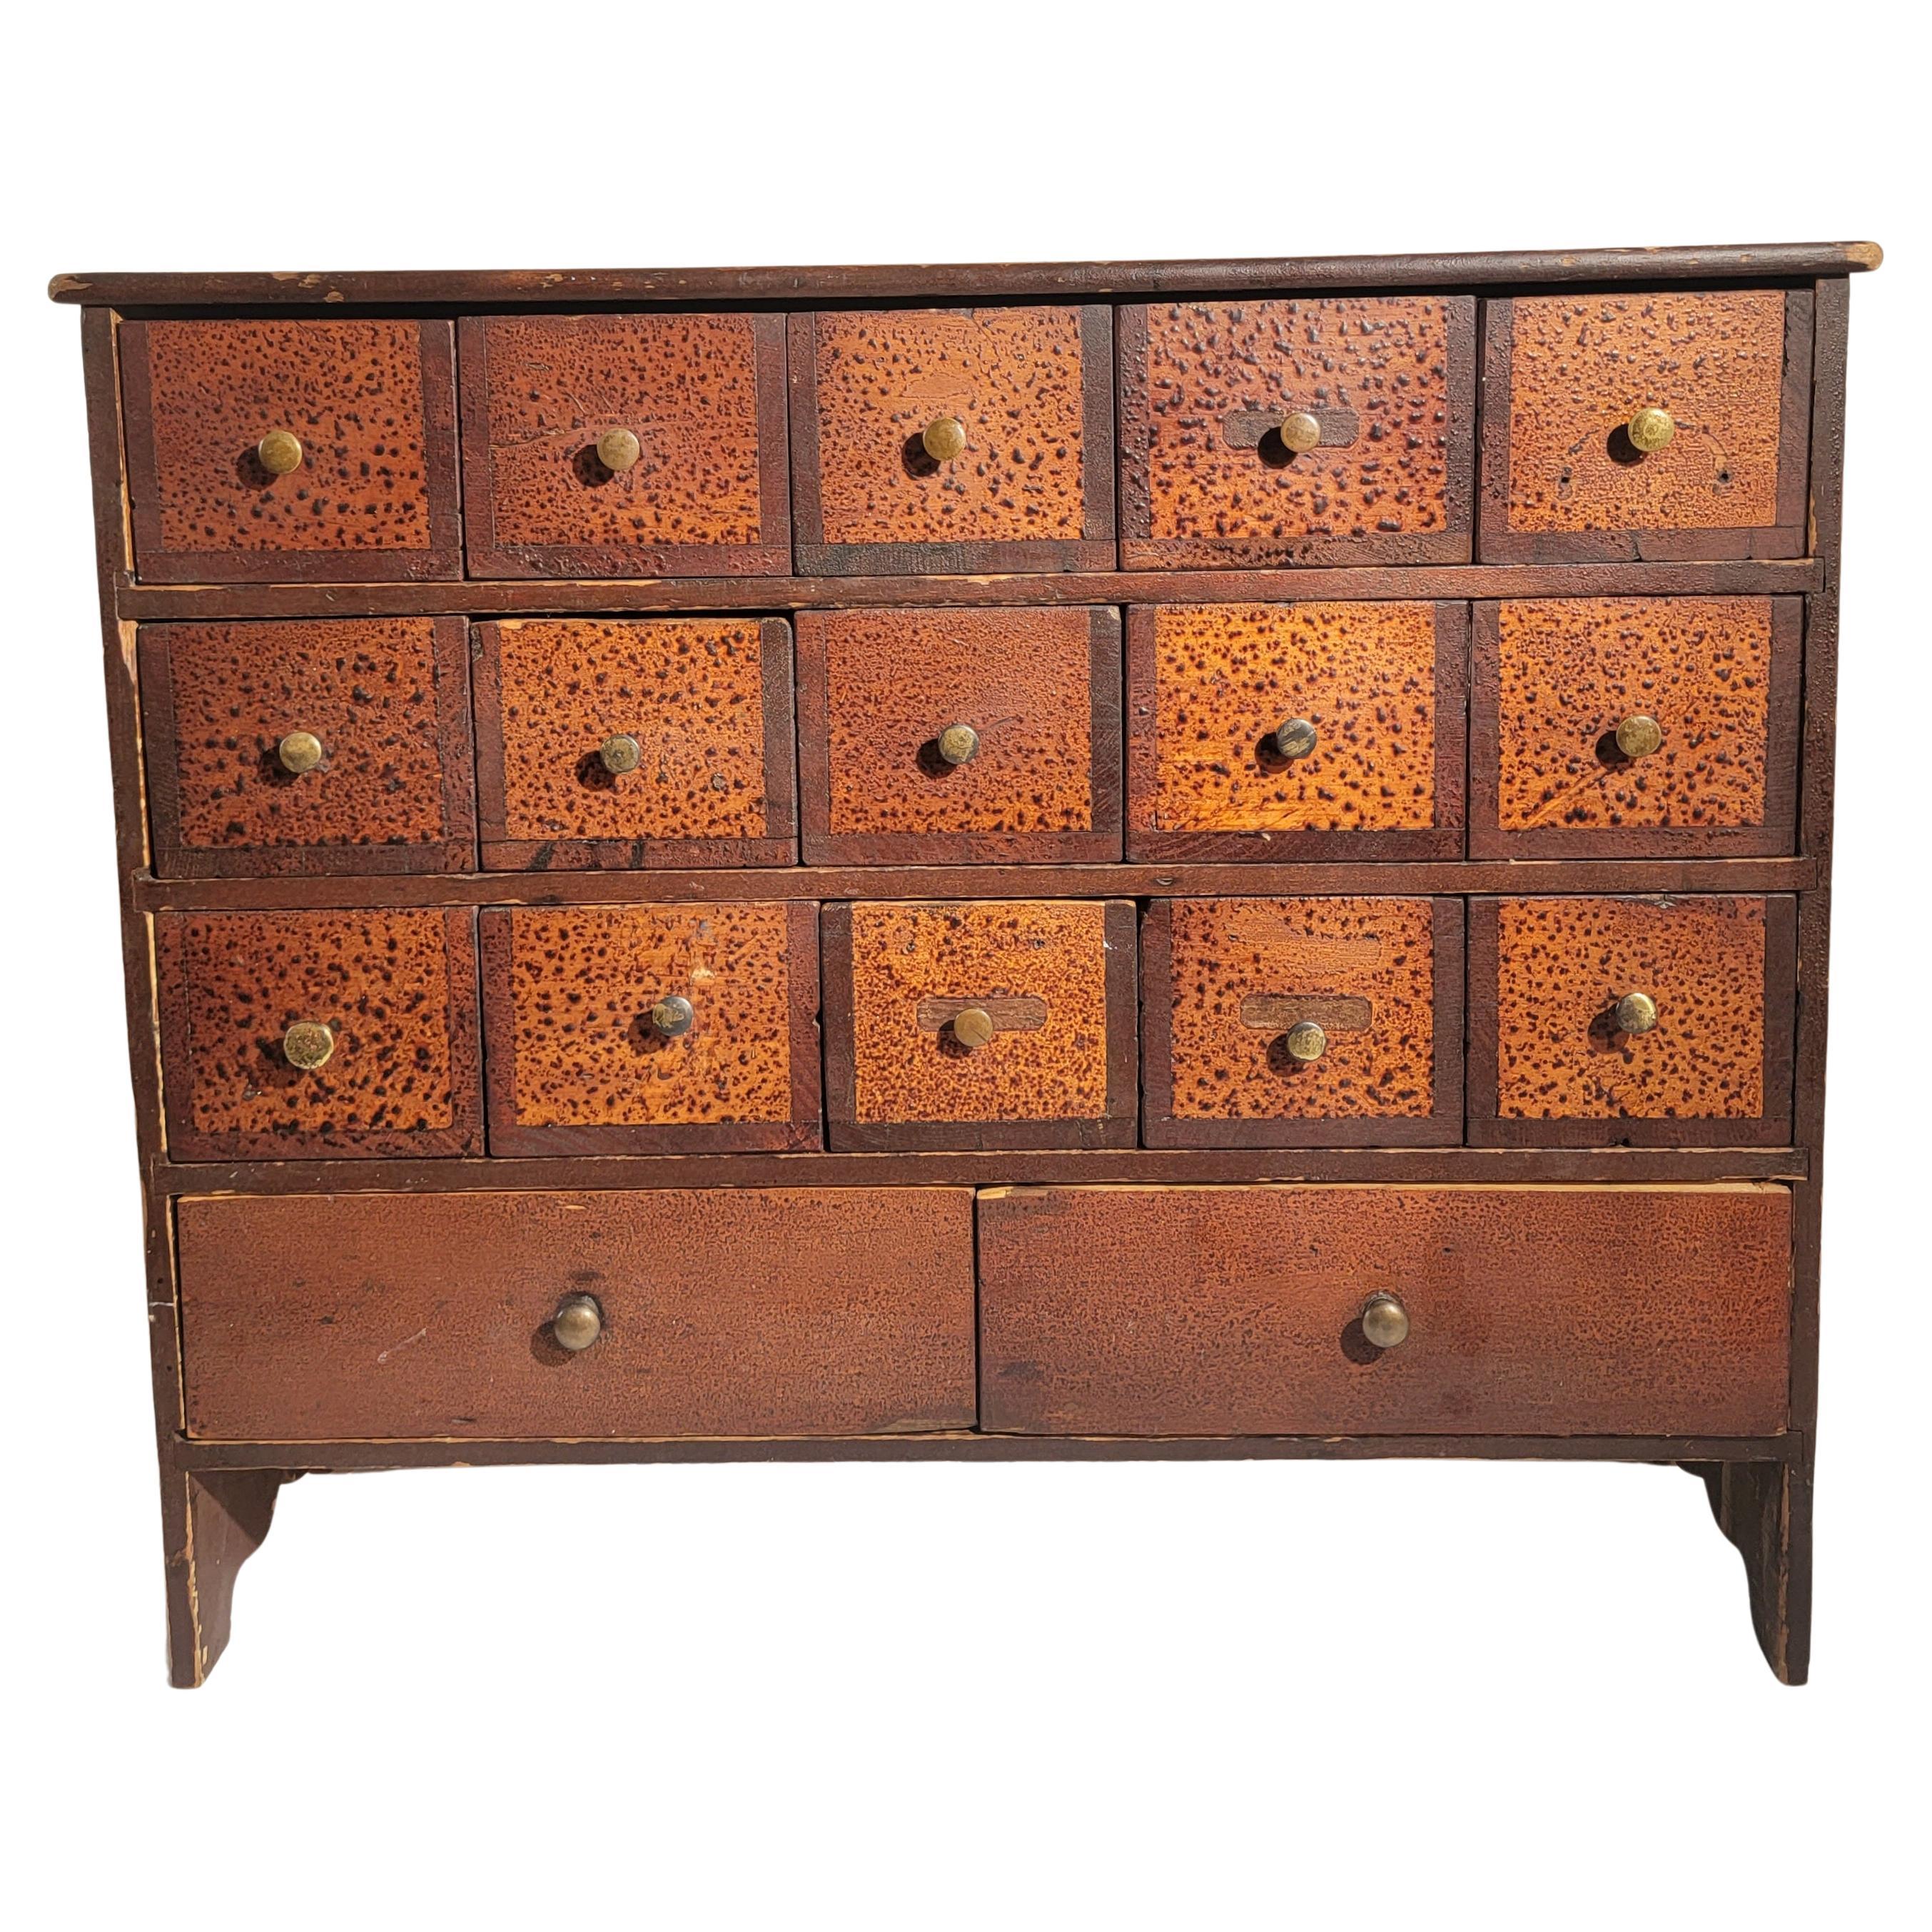 19thc Original Painted Apothecary Cabinet with 17 Drawers For Sale